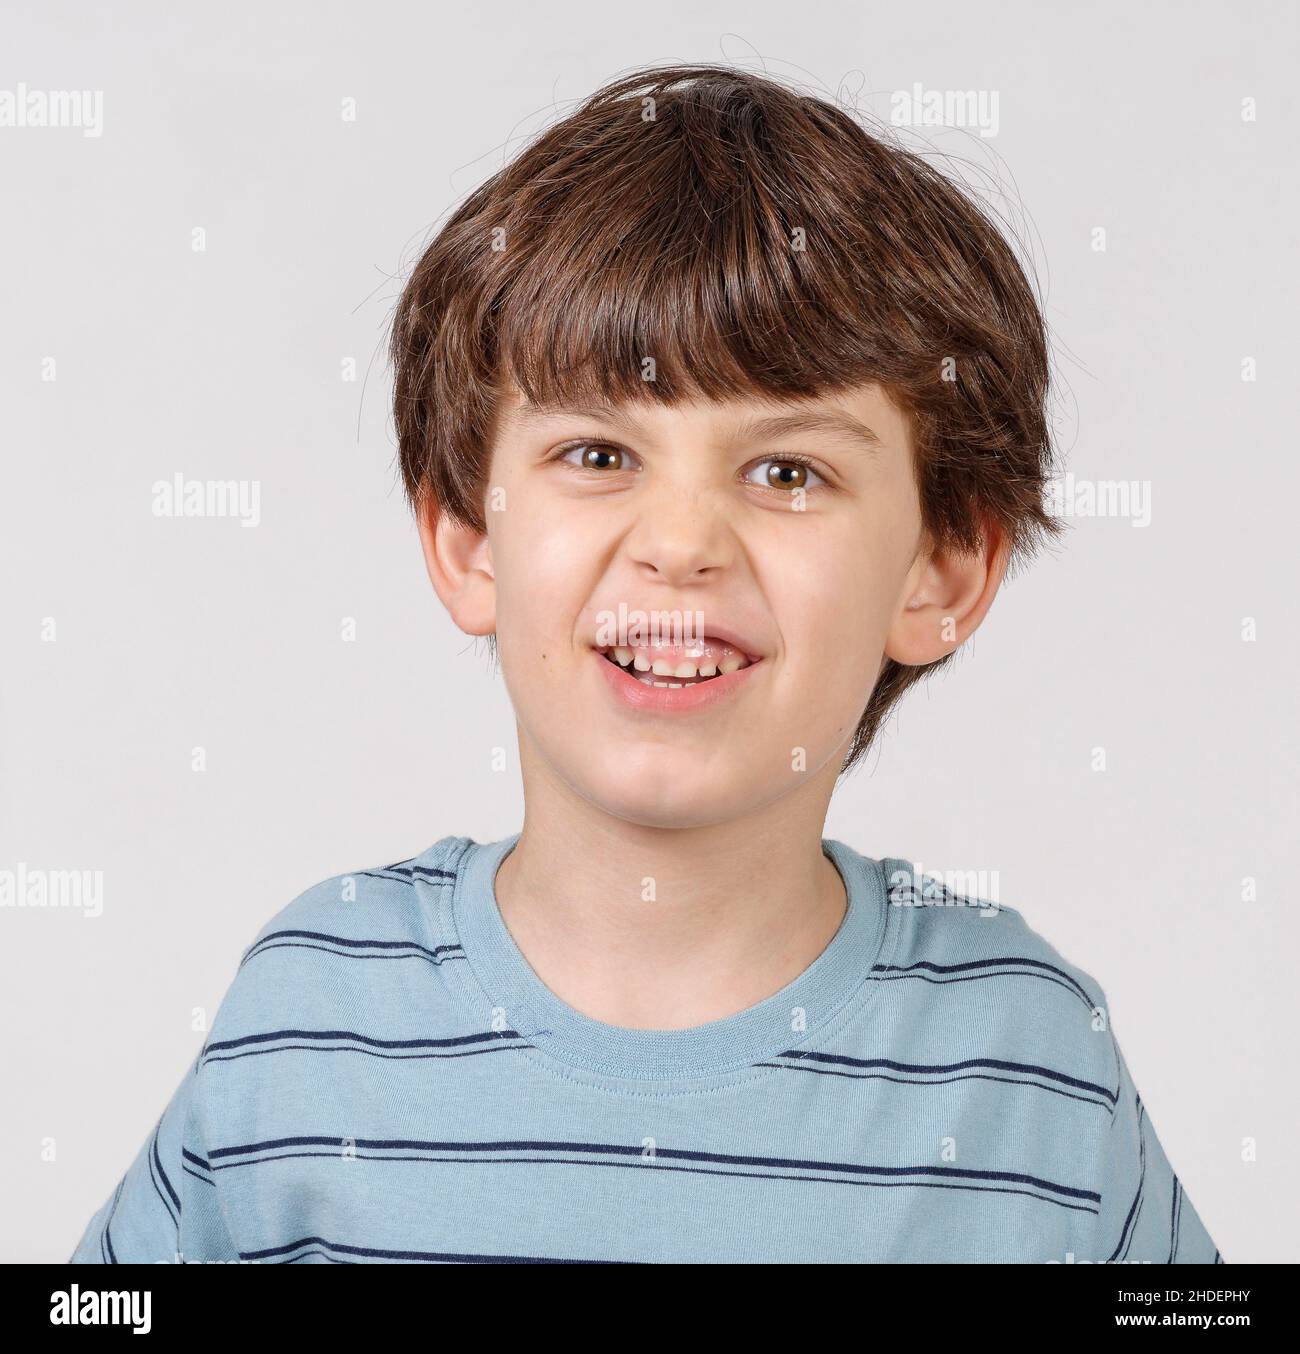 Young boy of six pulling faces Model releases Stock Photo